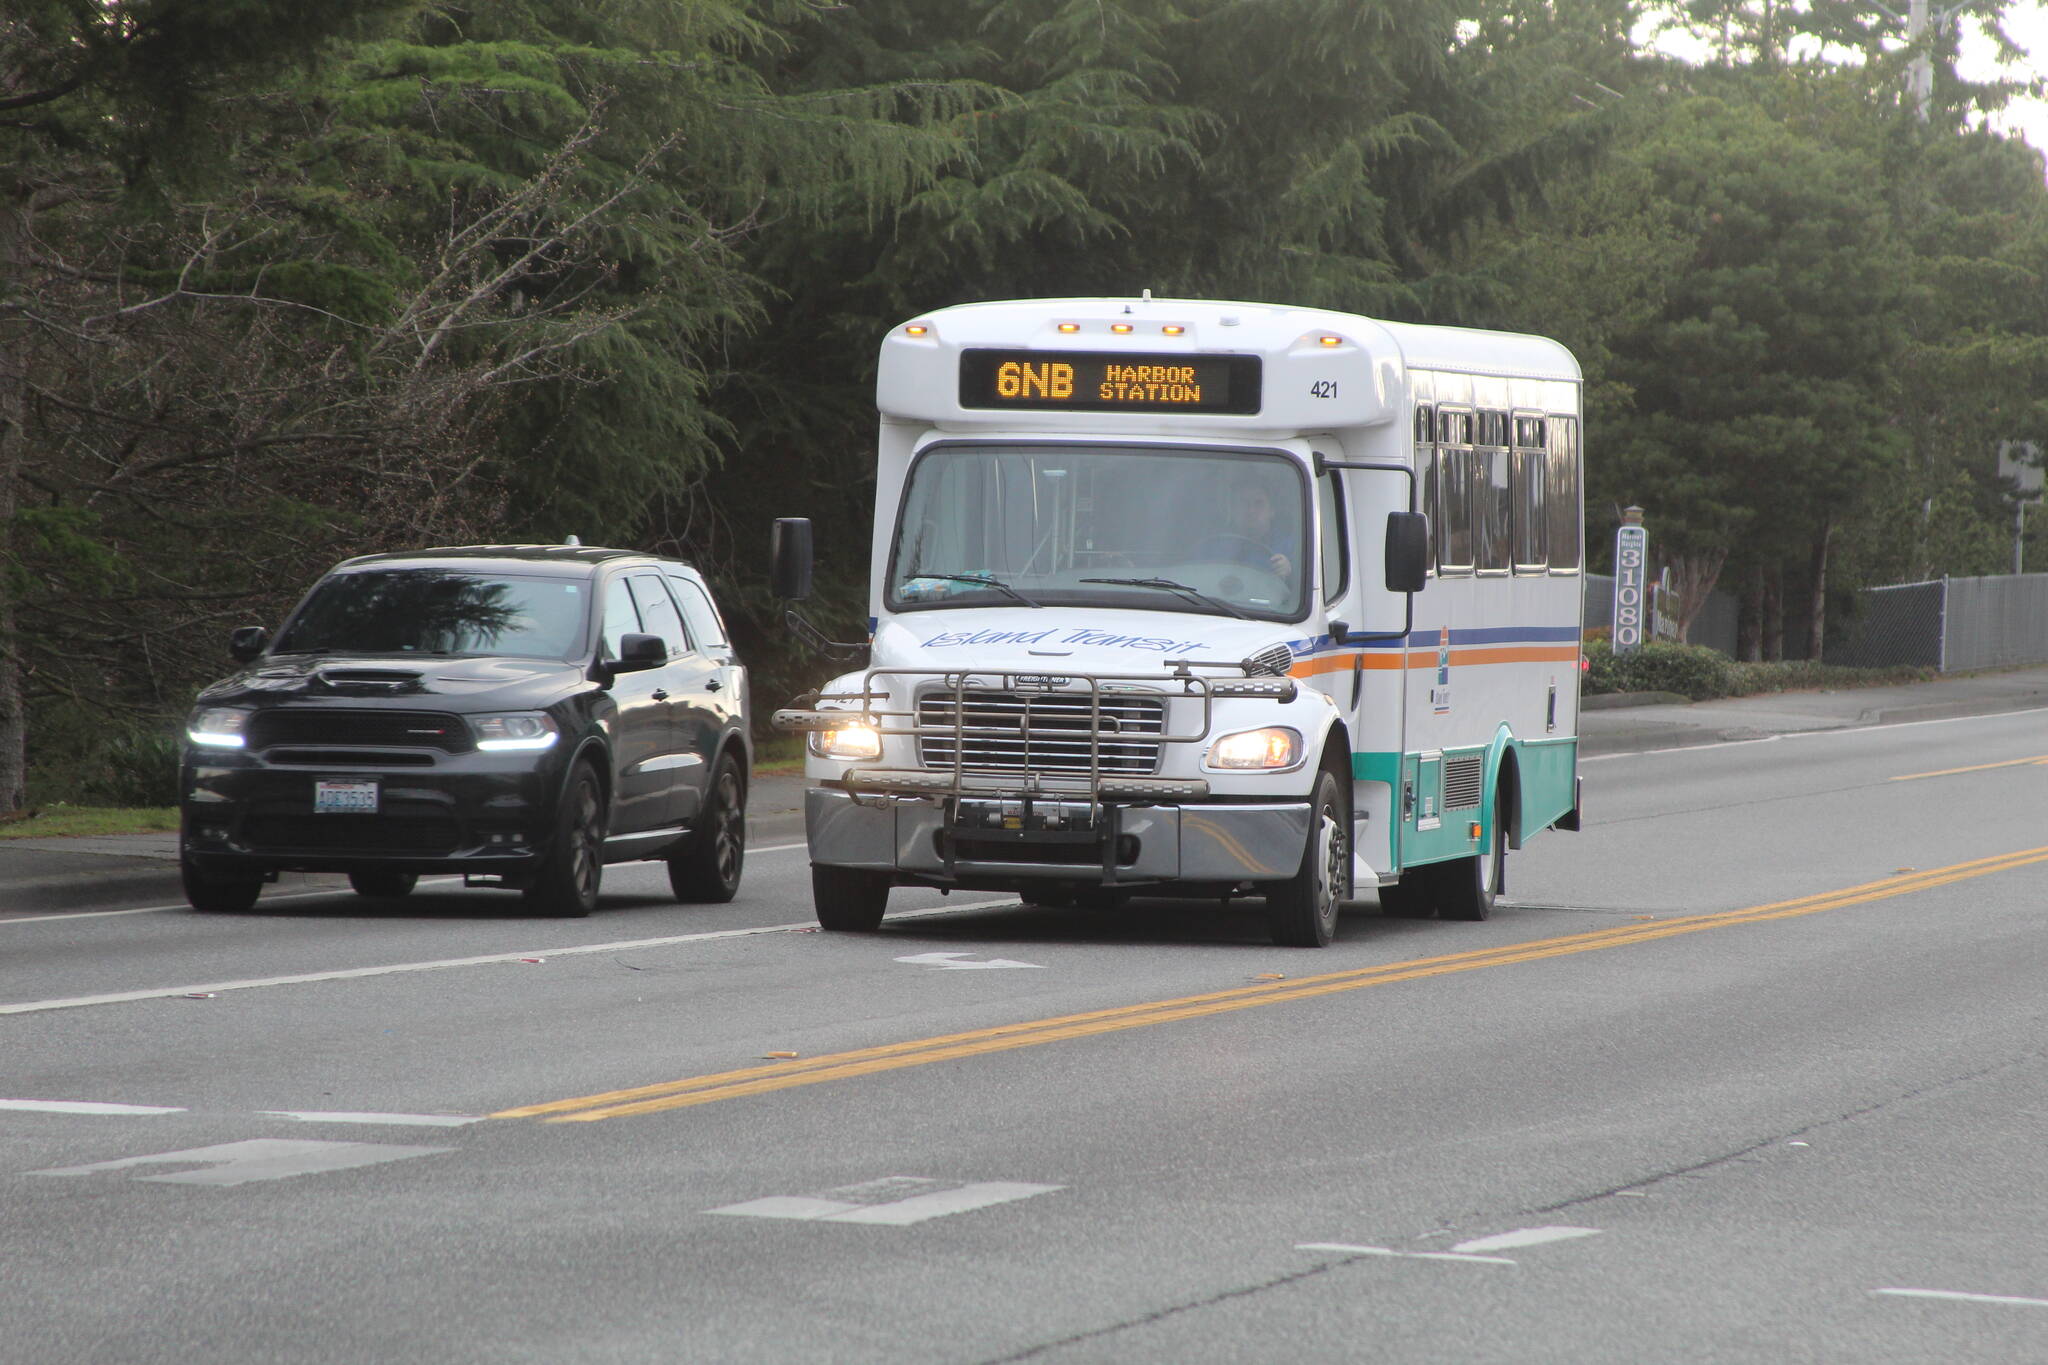 File photo by Karina Andrew/Whidbey News-Times
An Island Transit bus transports passengers on Whidbey. Island Transit recently received a grant to construct a new transit center on the South End.